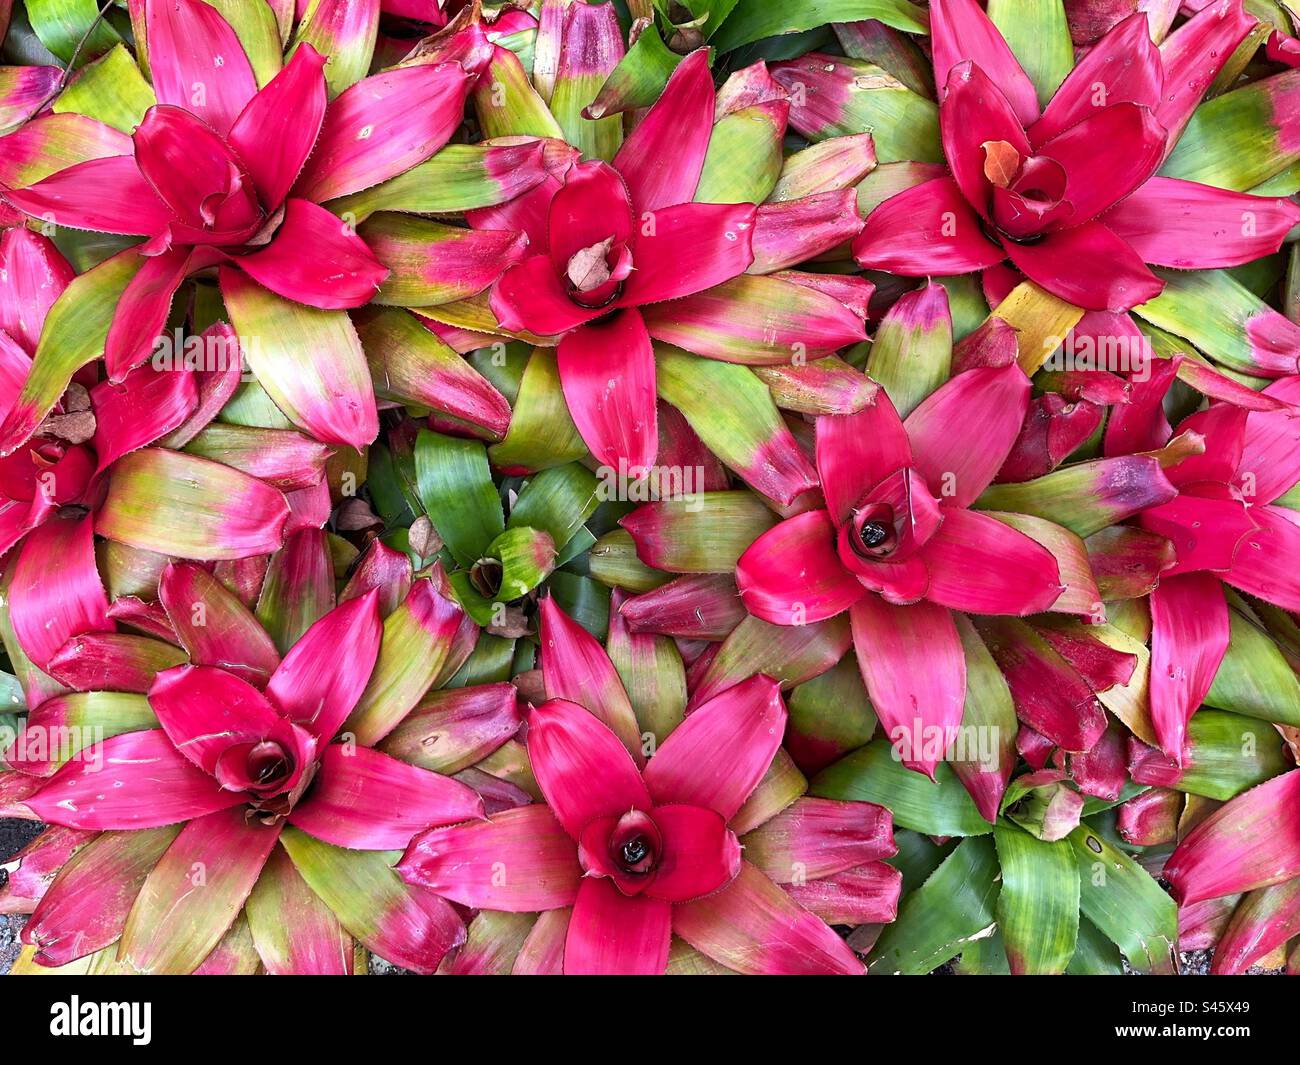 Closeup view of the flowering plant Bromeliad Stock Photo